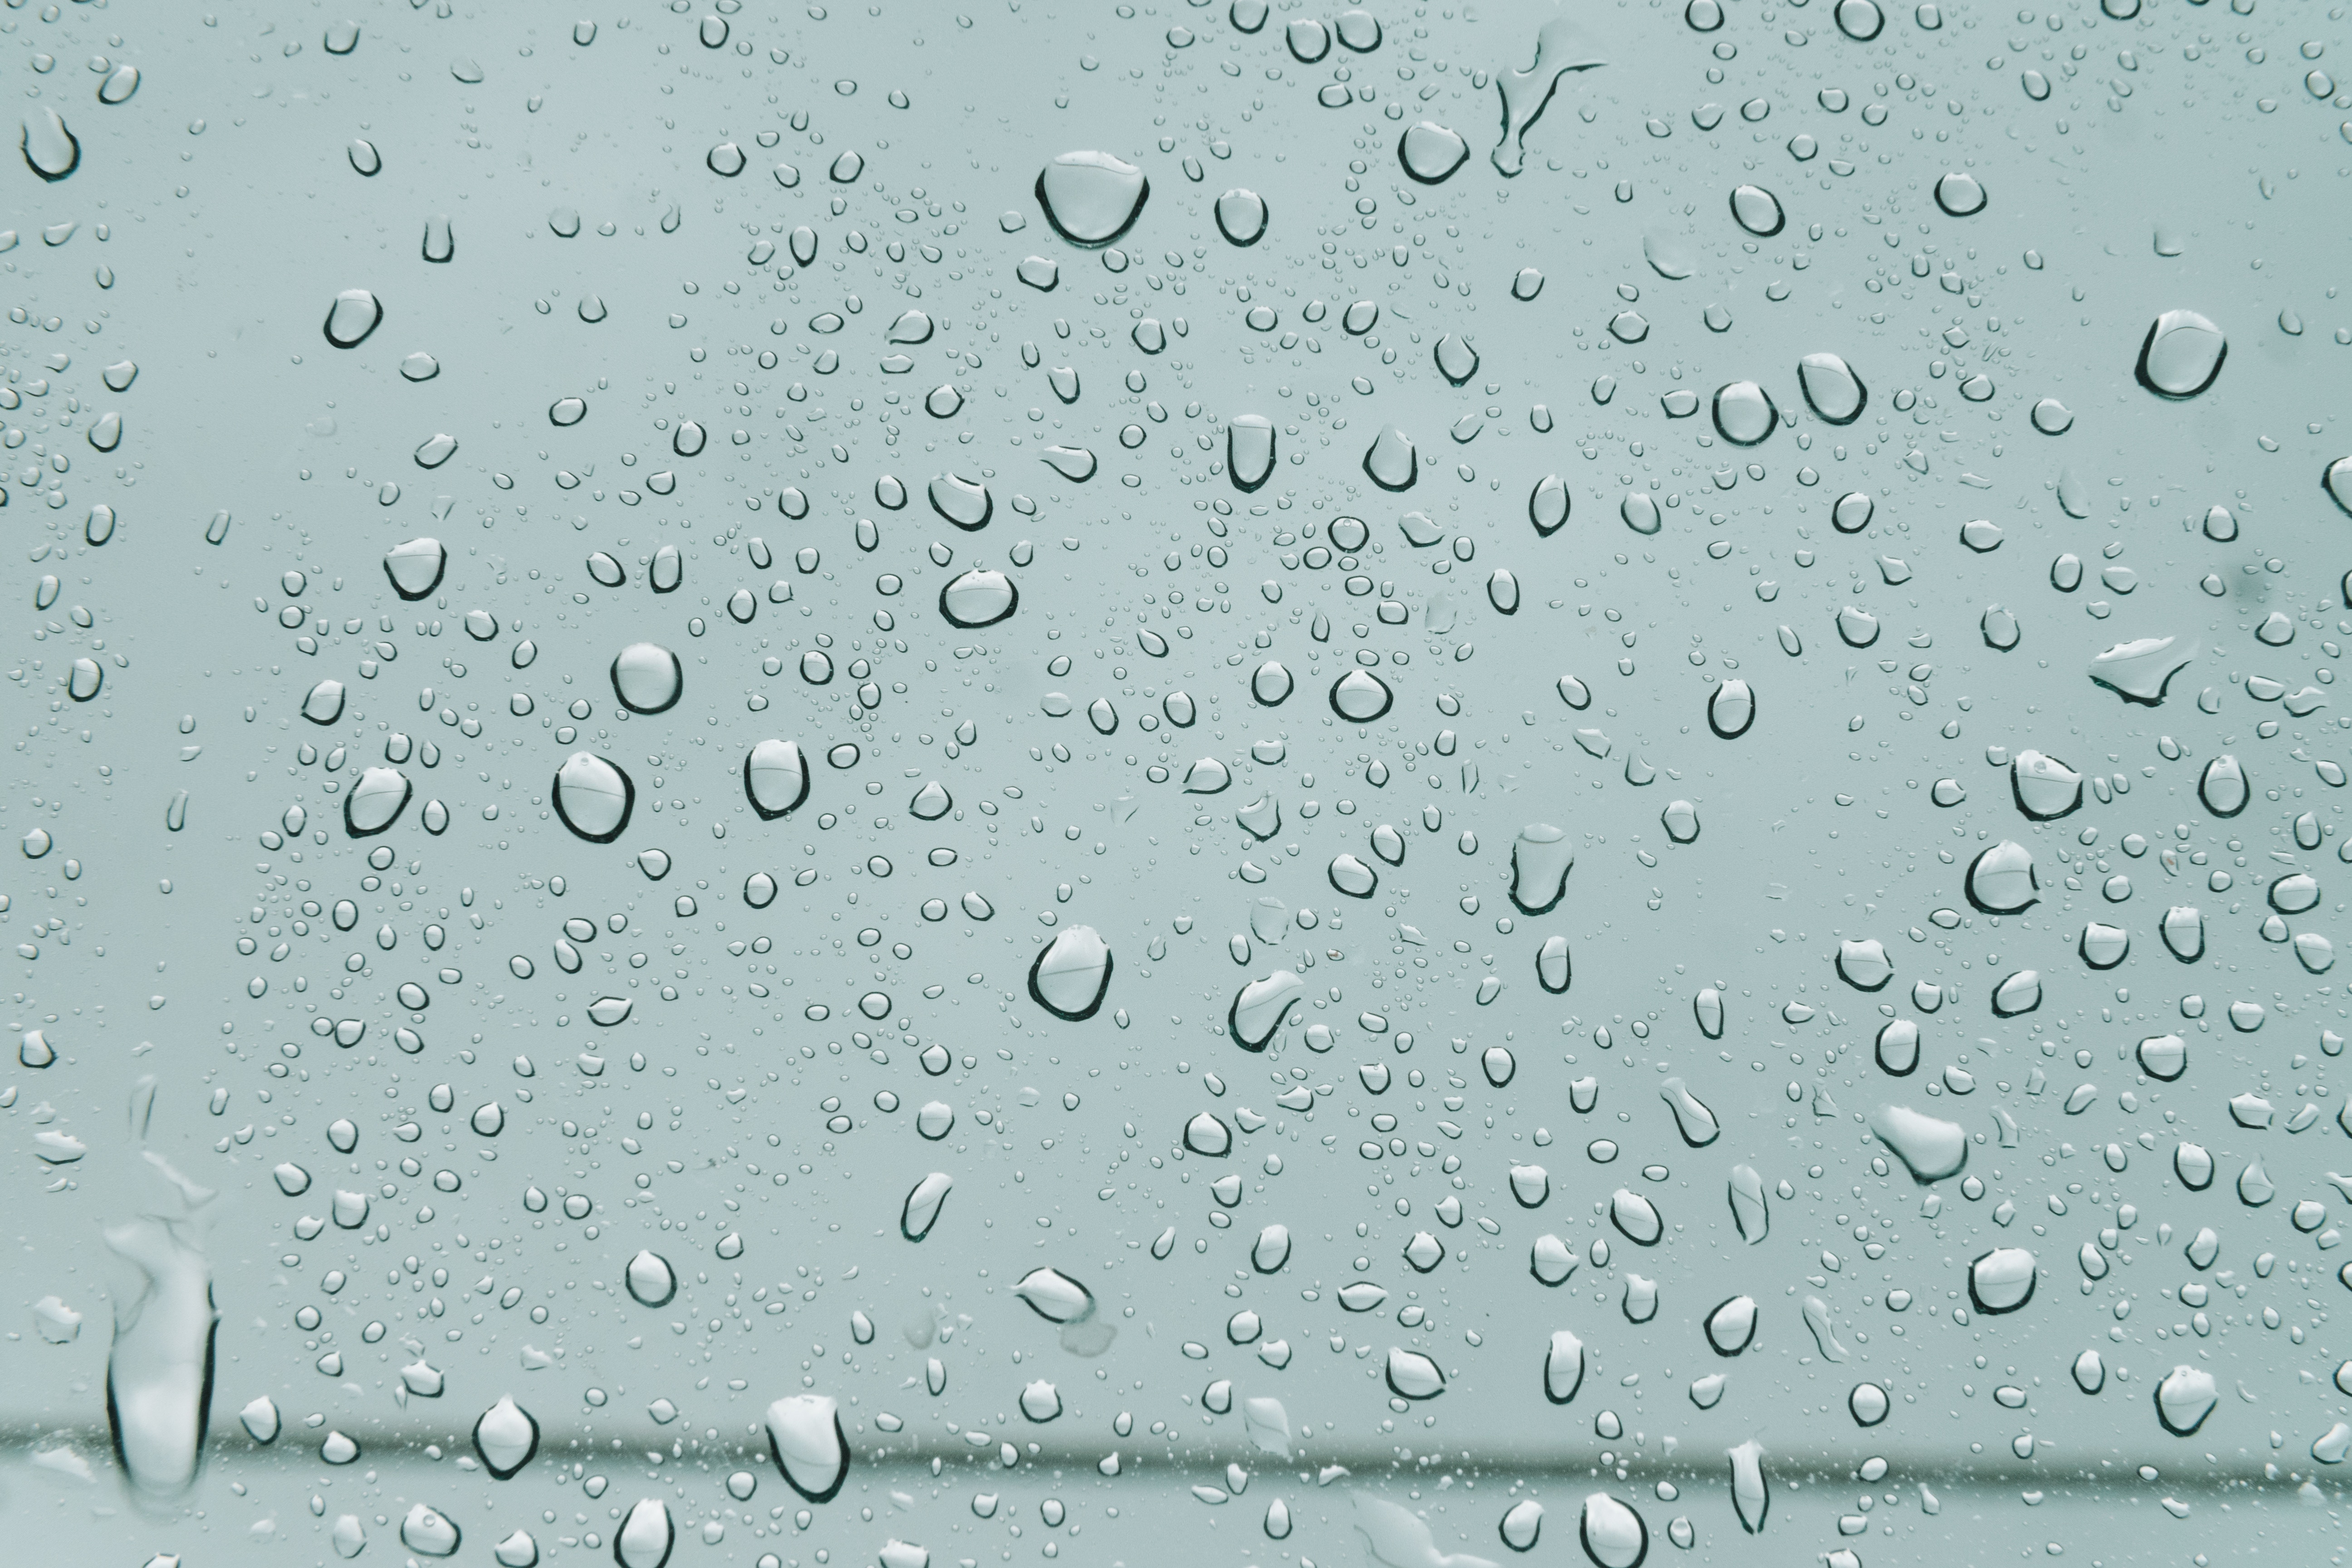 form, surface, forms, rain, drops, macro, wet, moisture, humid images